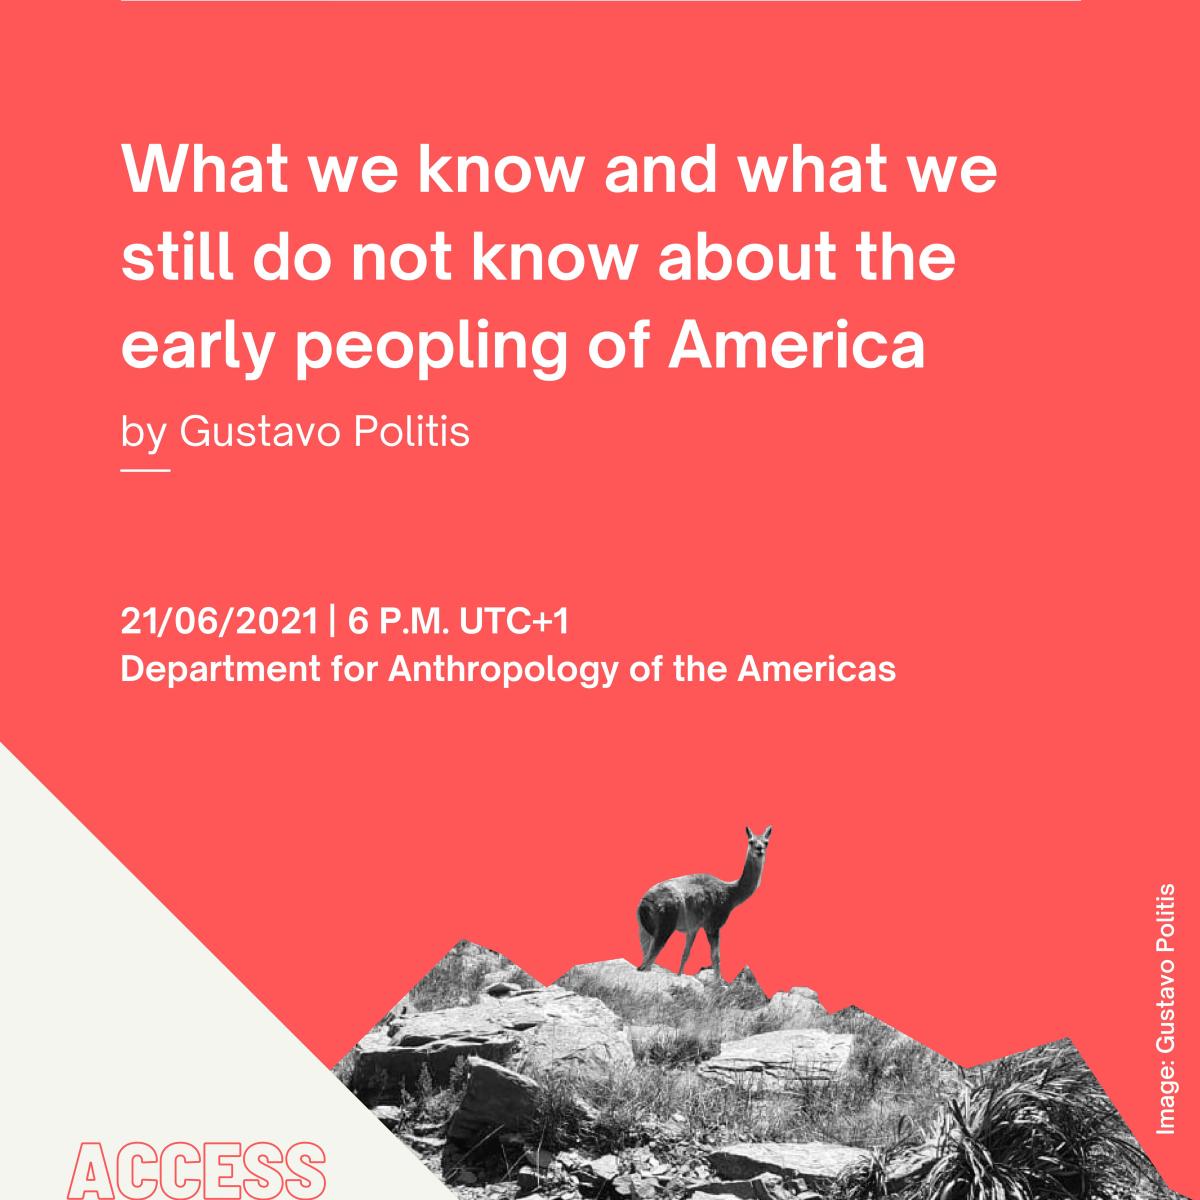 Sommersemester 21: What we know and what we still do not know about the early peopling of America